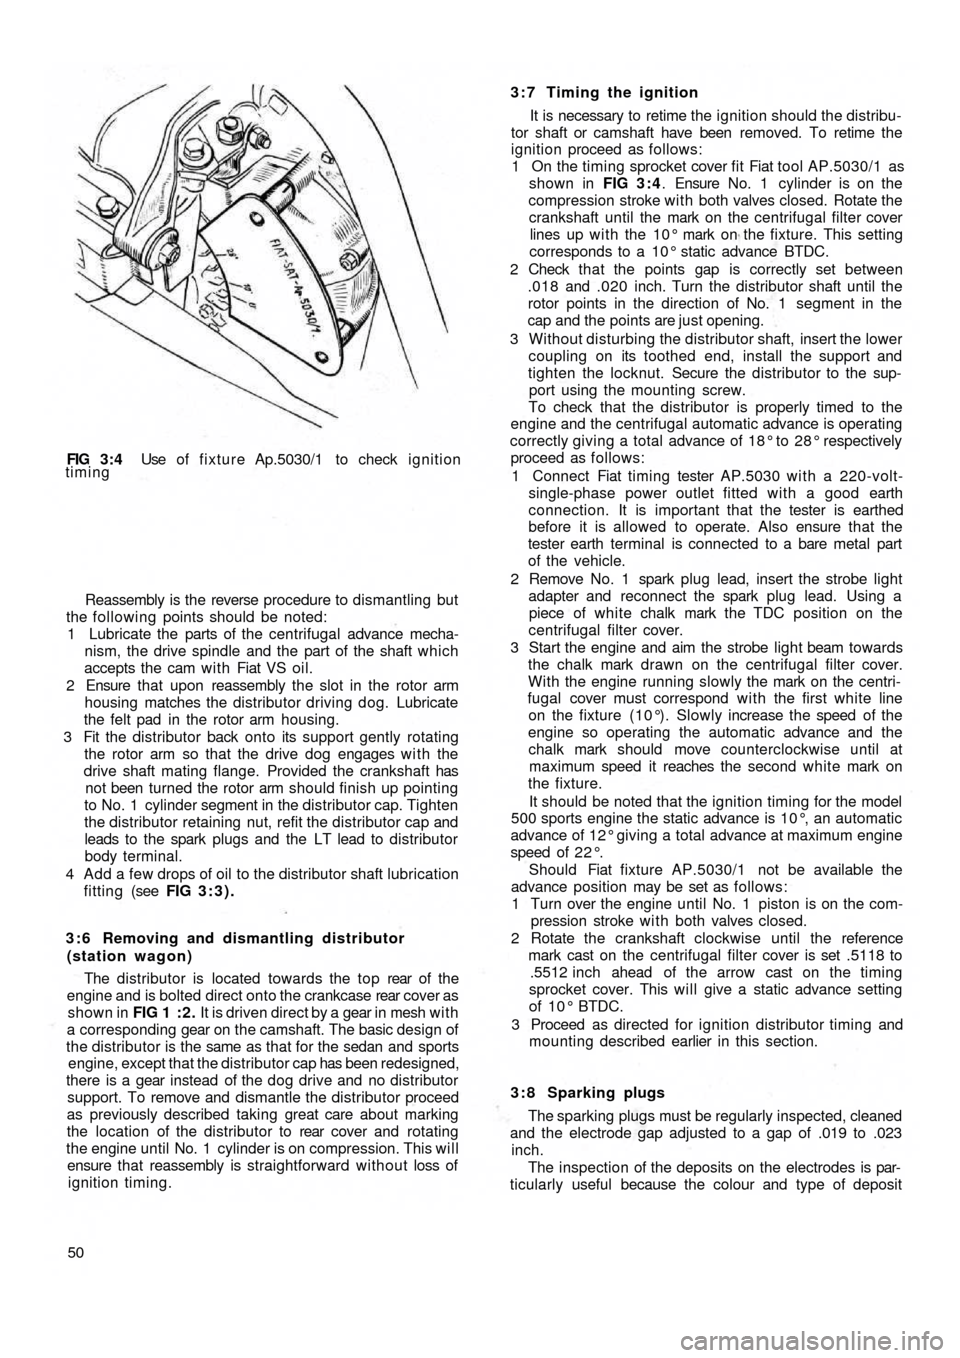 FIAT 500 1969 1.G Workshop Manual FIG  3 : 4  Use of fixture Ap.5030/1 to check ignition
timing
Reassembly is the reverse procedure to dismantling but
the following points should be noted:
1 Lubricate the parts of the centrifugal adva